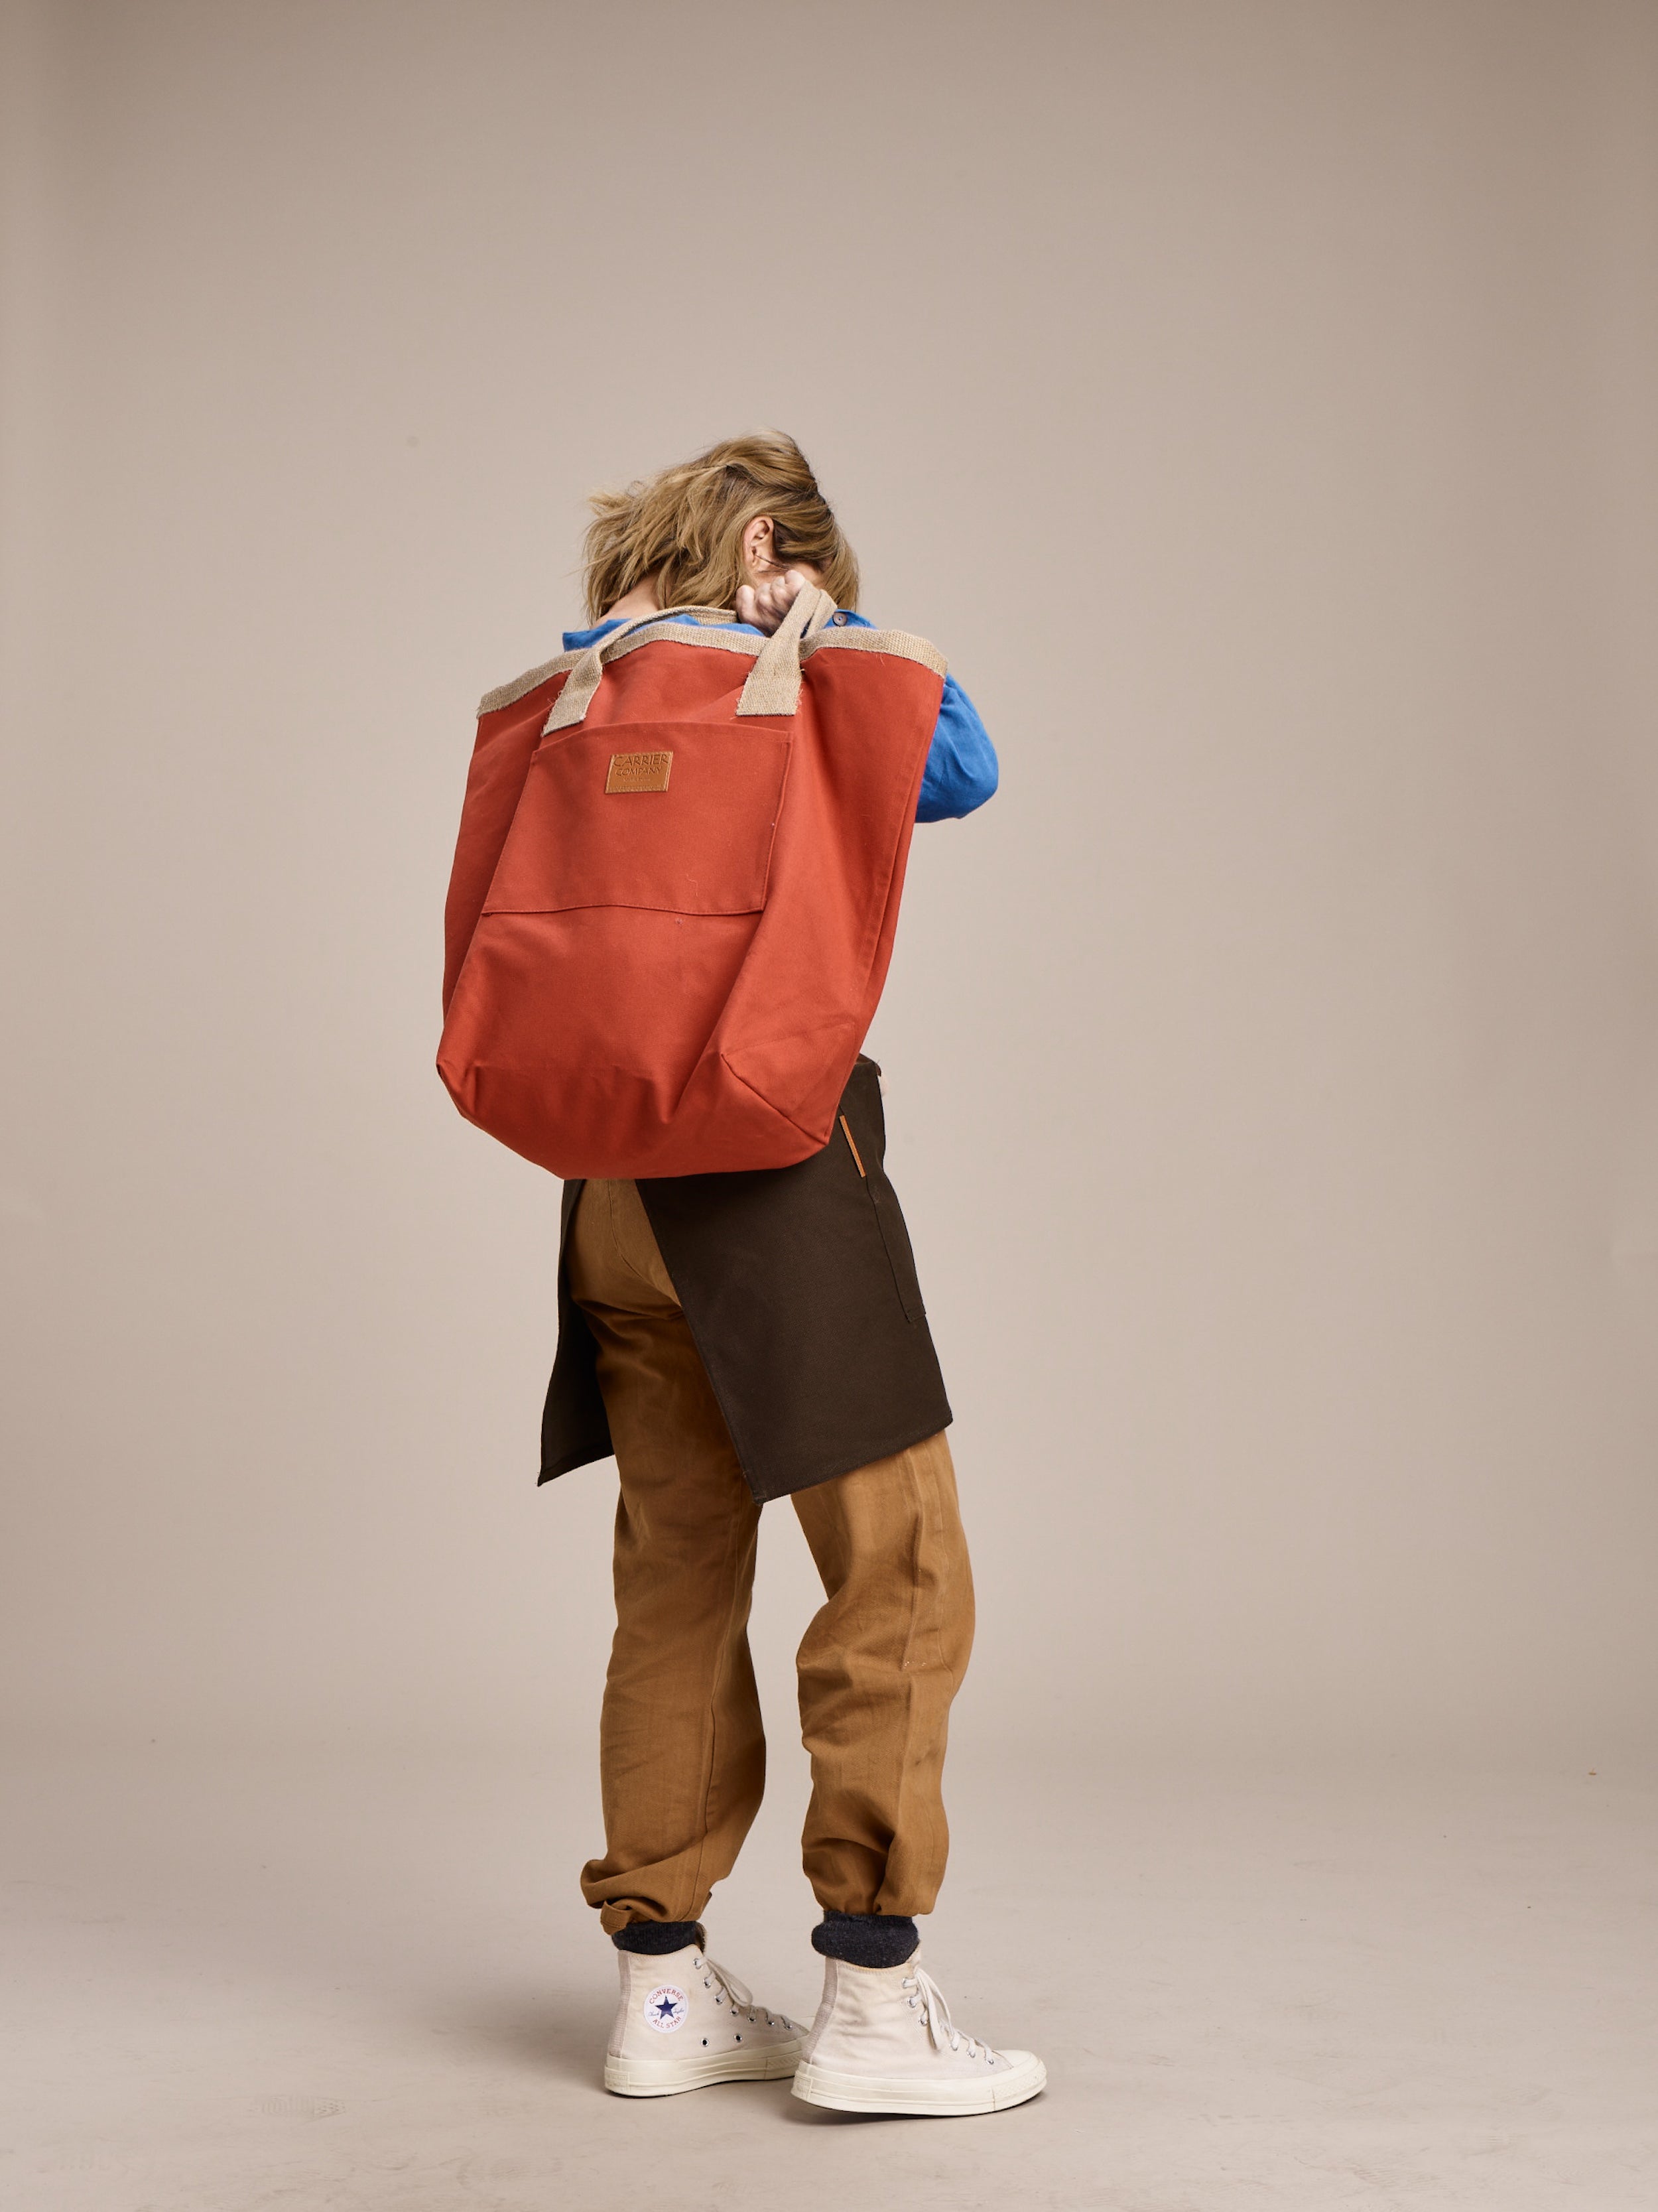 Woman wearing Carrier Company Women's Work Trouser in Tan with Linen Collarless Shirt and Half Apron holding Loot & Boot Bag